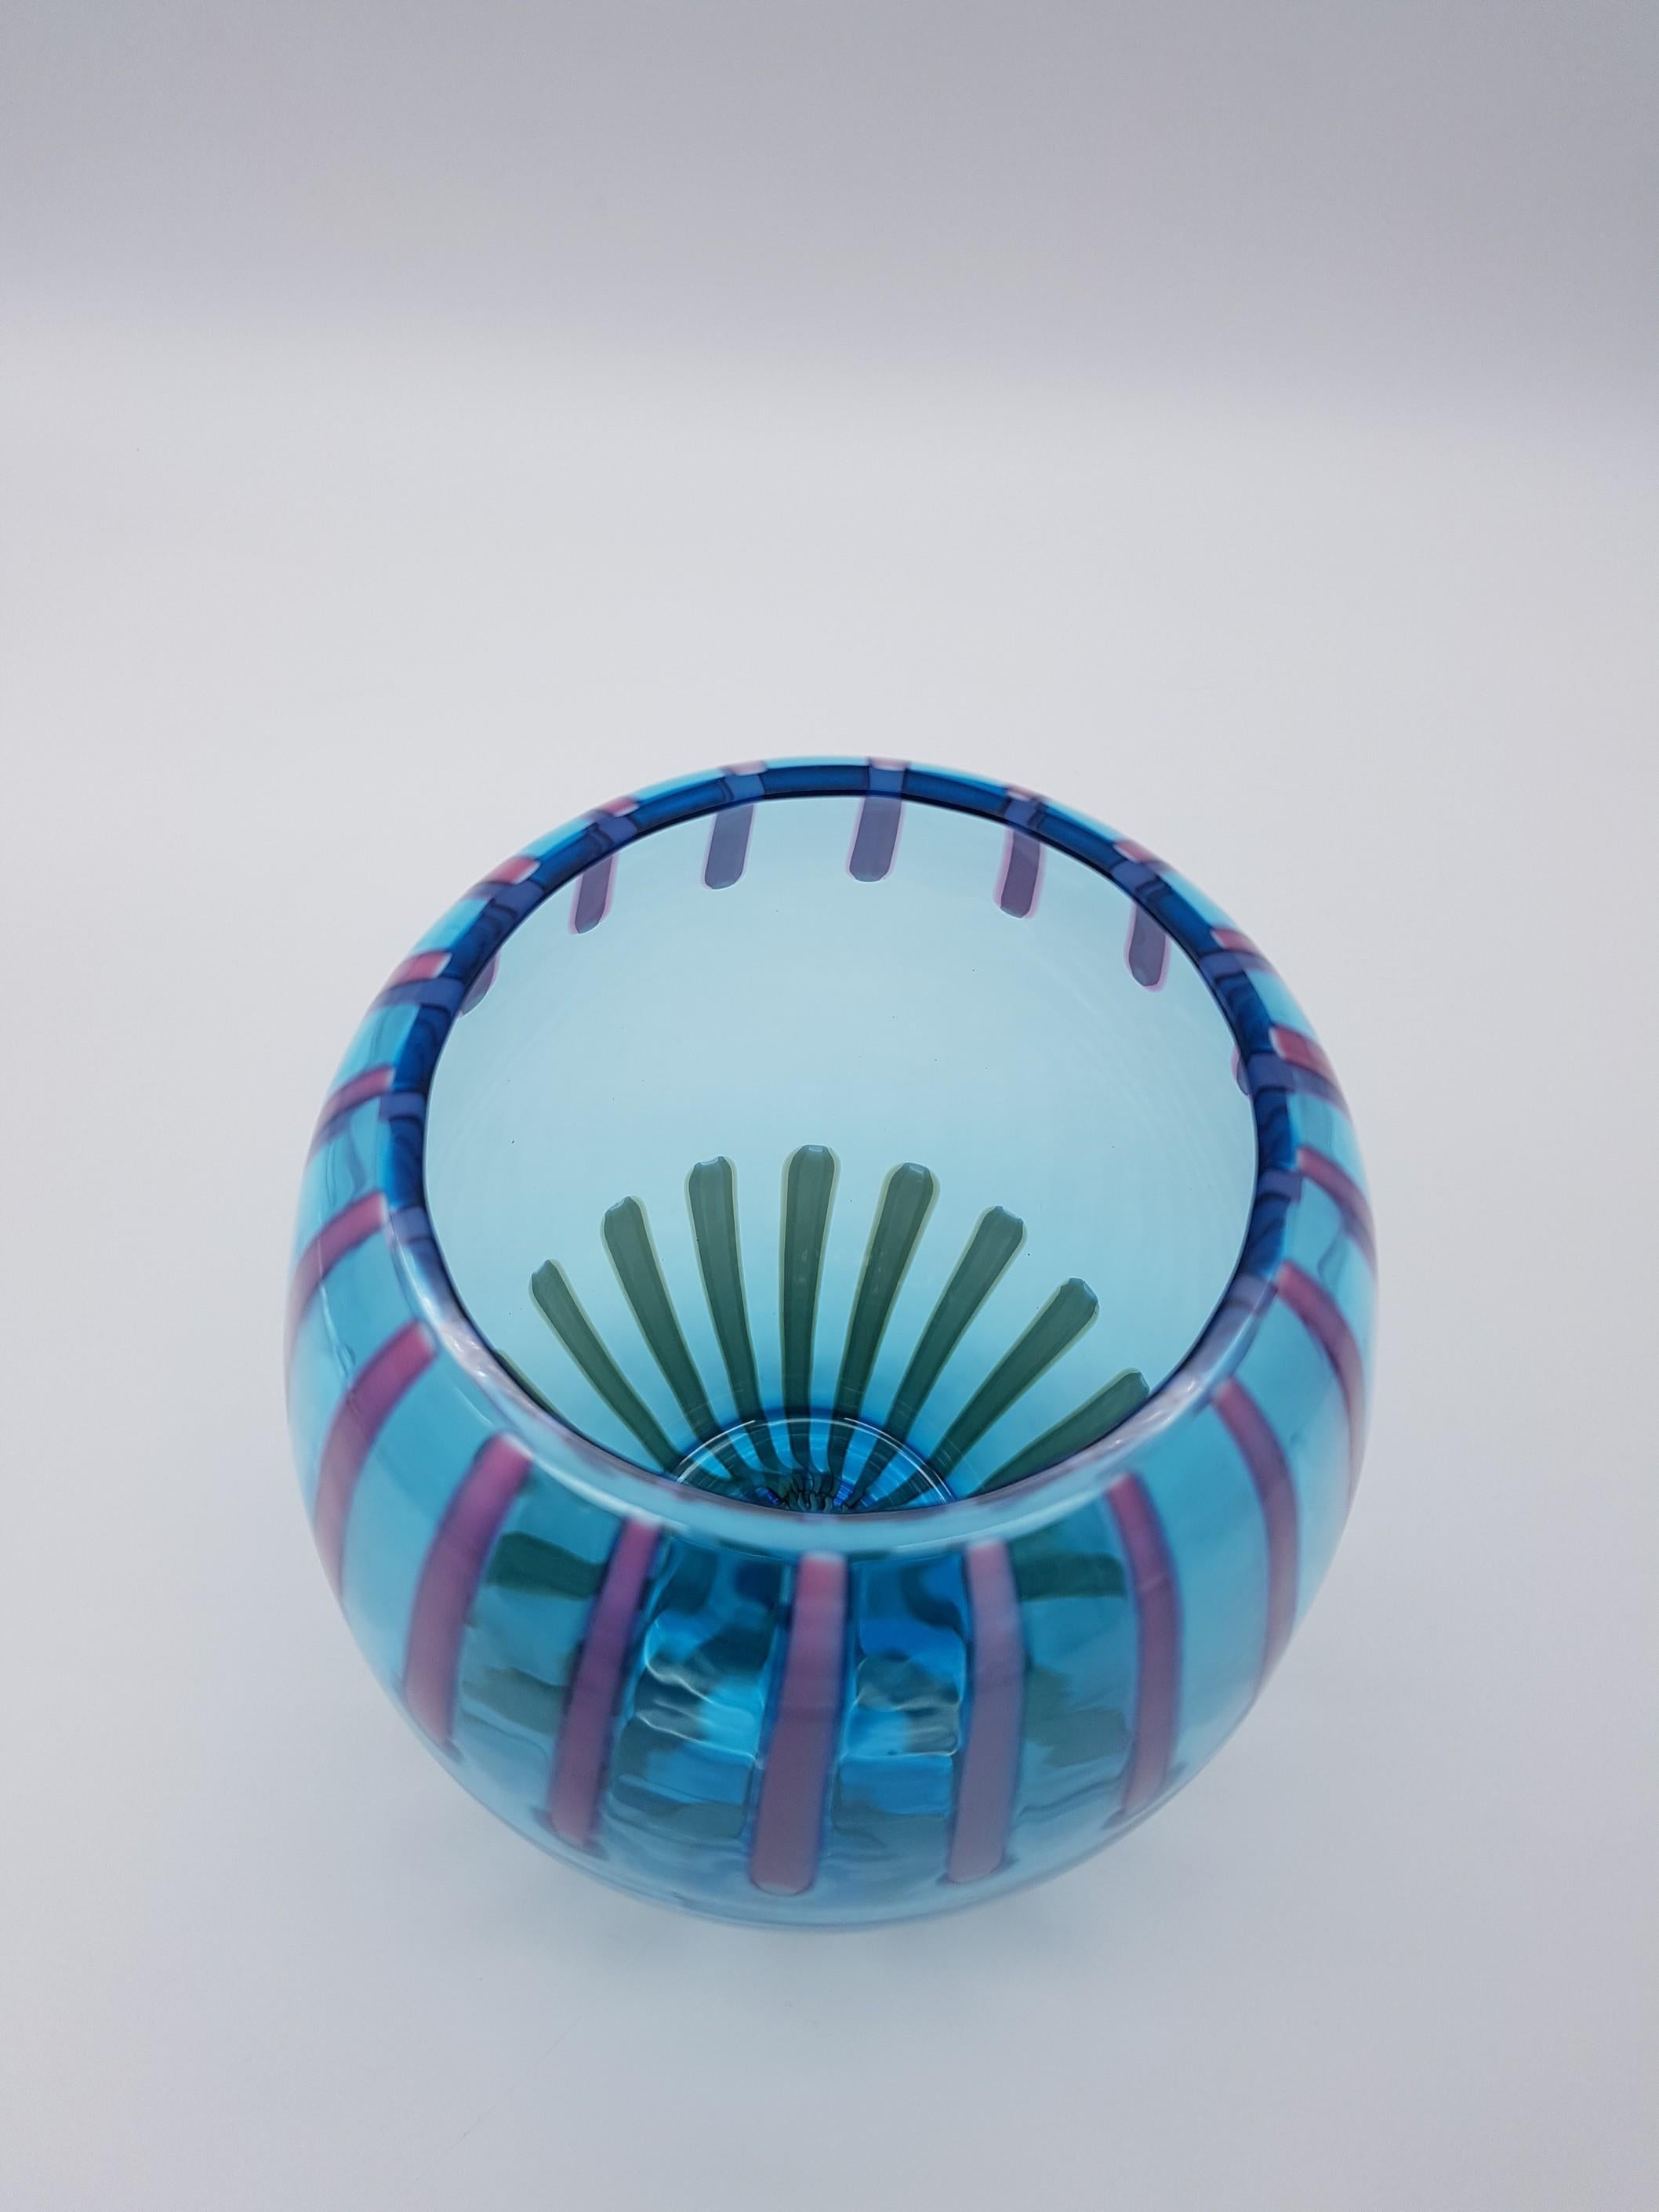 Modern Turquoise/Blue Murano-Glass Vase by Gino Cenedese E Figlio, late 1990s For Sale 7